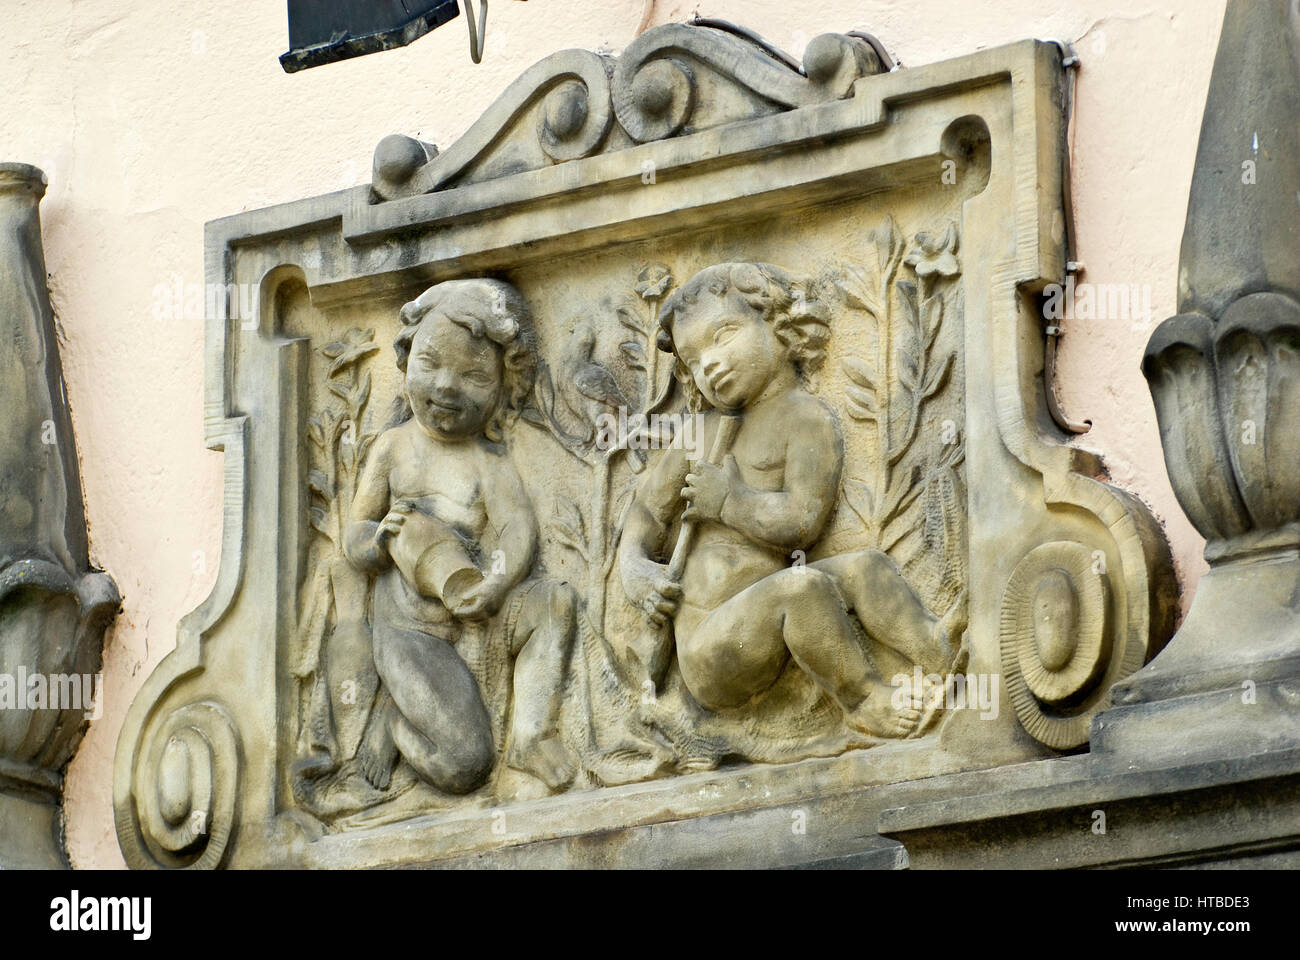 Low relief at ulica Dluga (Long Street) in Gdansk, Pomerania, Poland Stock Photo